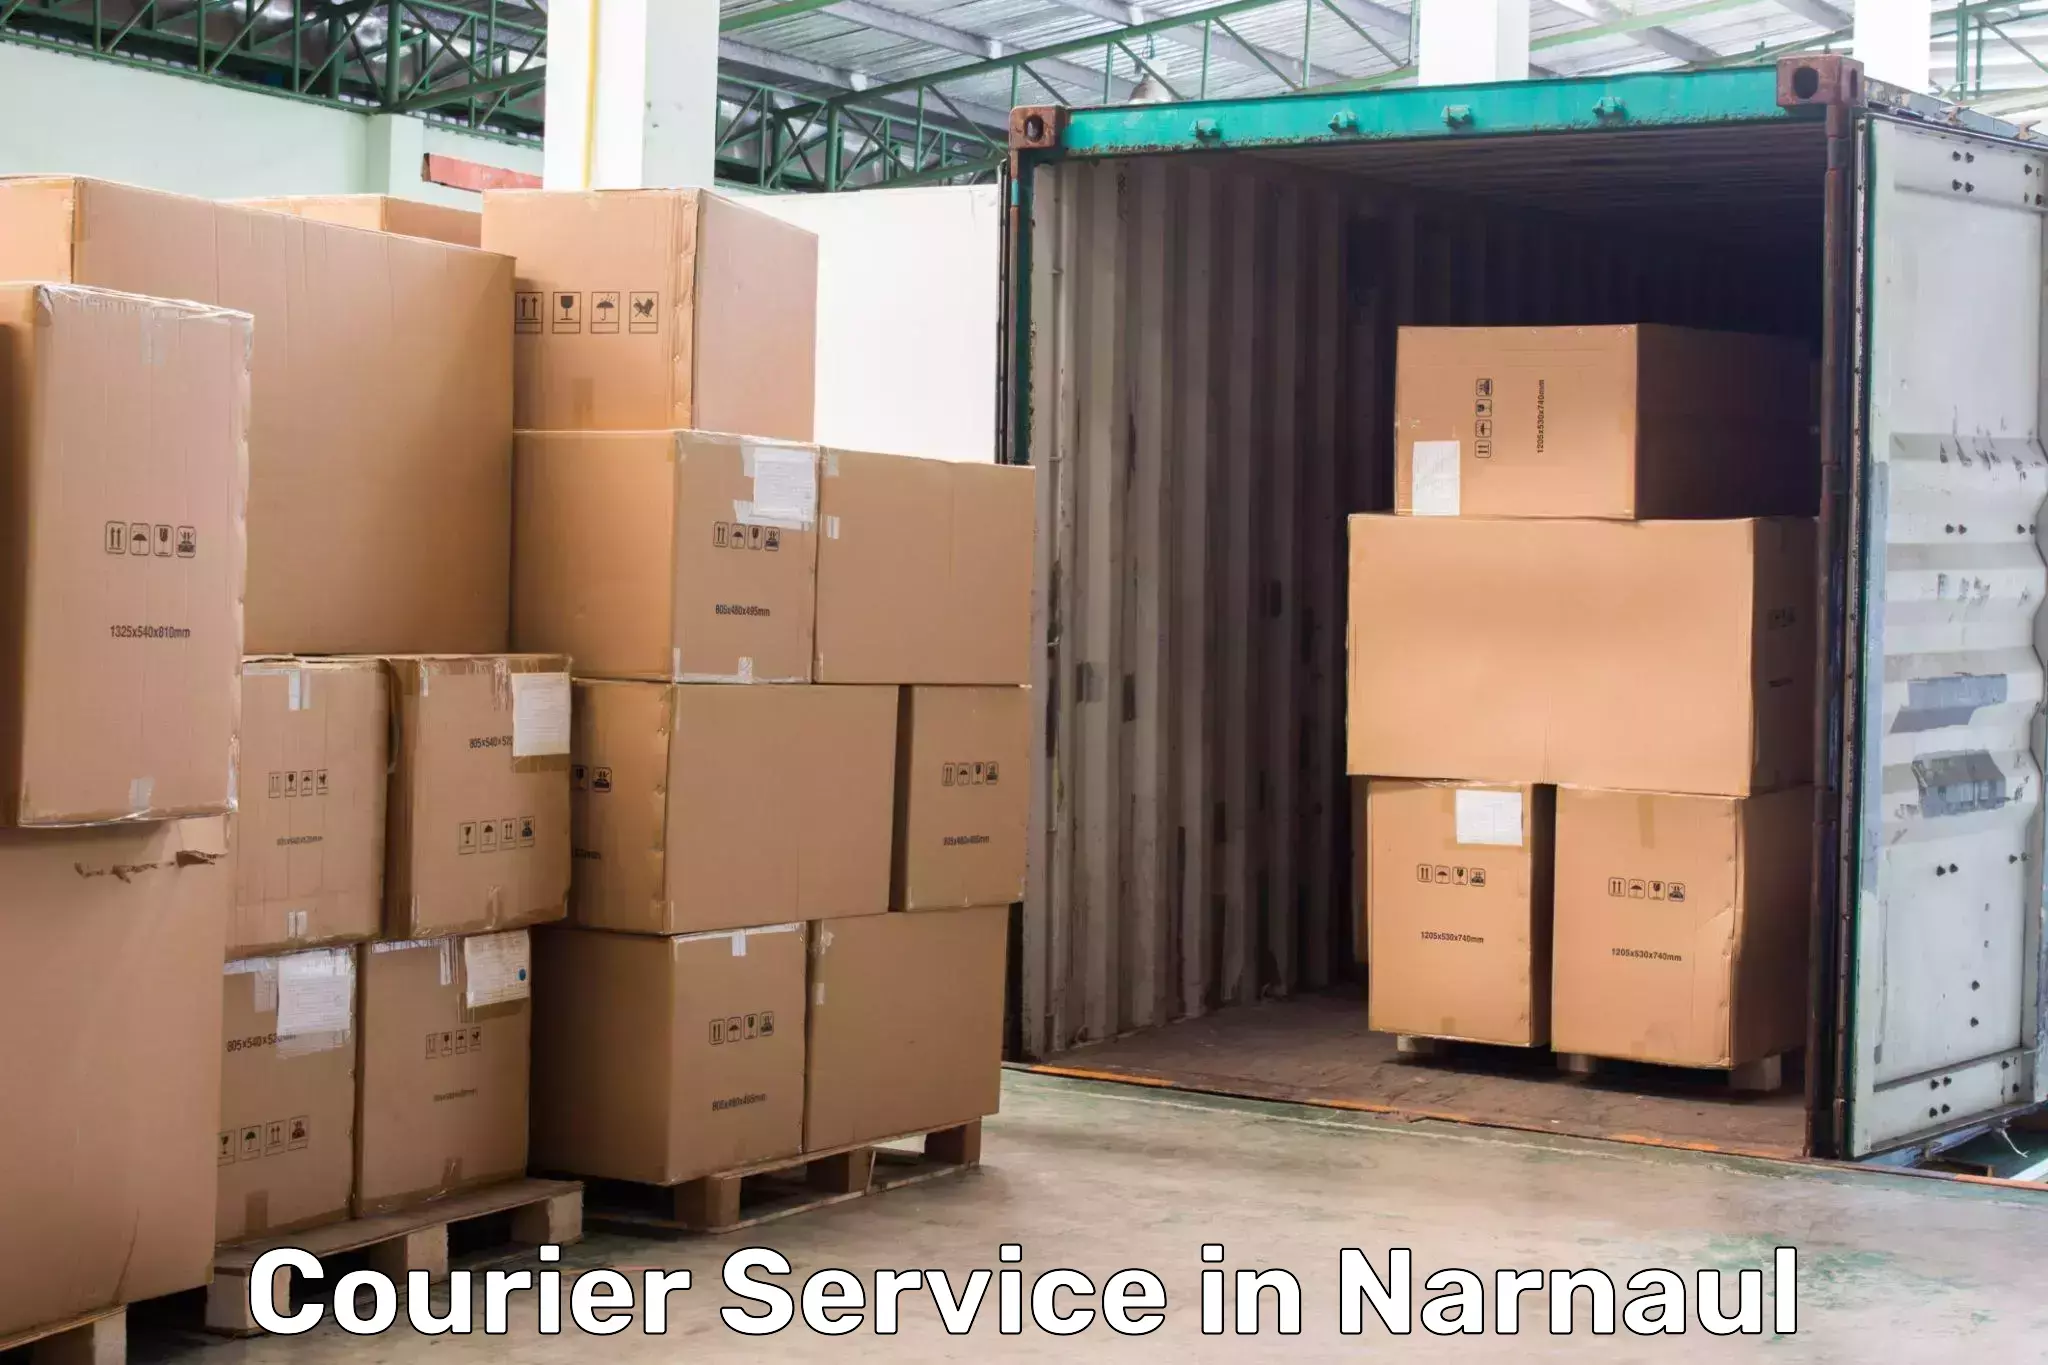 Express logistics providers in Narnaul